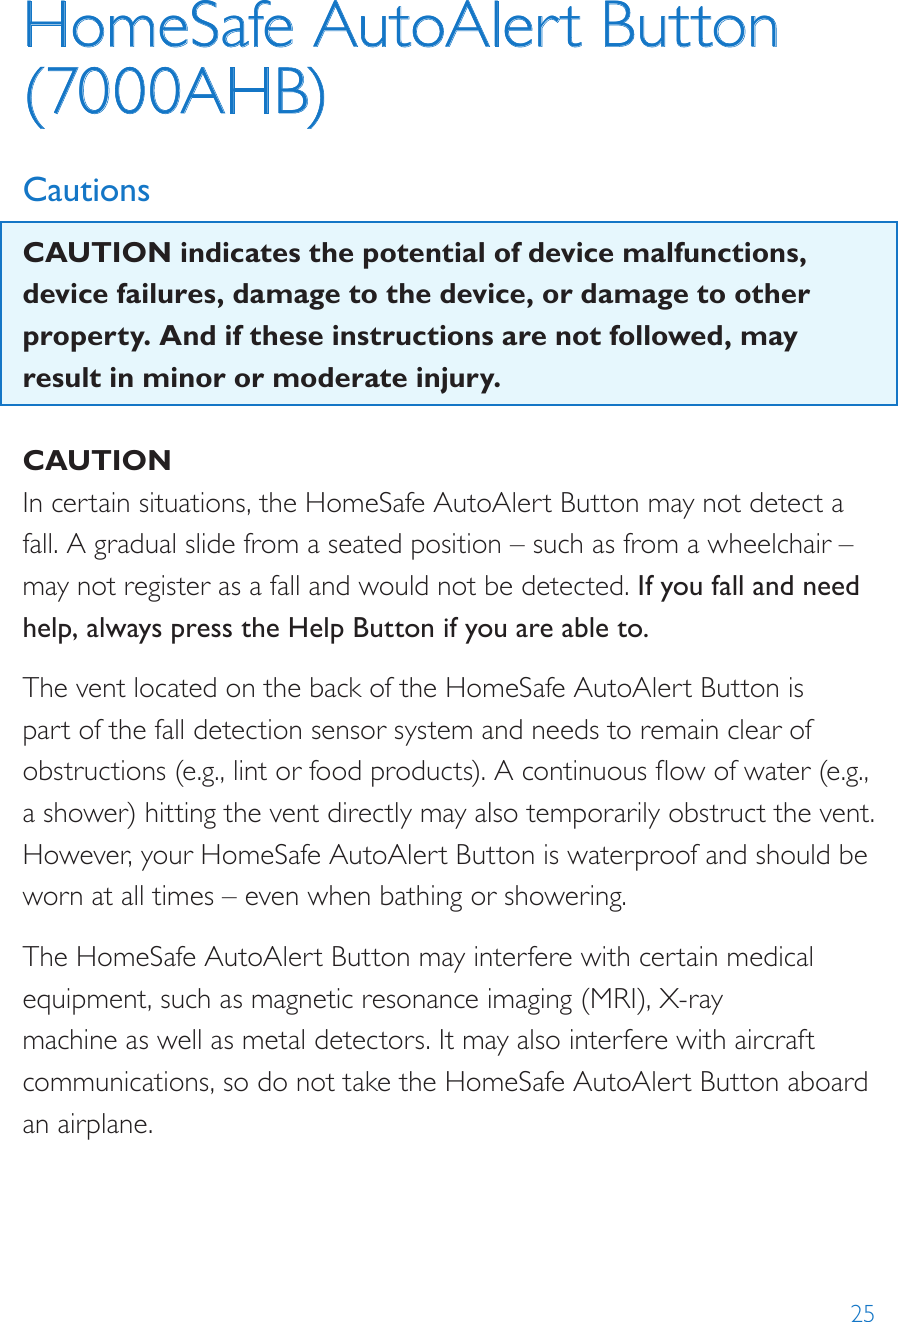 25HomeSafe AutoAlert Button (7000AHB)CautionsCAUTION indicates the potential of device malfunctions, device failures, damage to the device, or damage to other property. And if these instructions are not followed, may result in minor or moderate injury.CAUTIONIn certain situations, the HomeSafe AutoAlert Button may not detect a fall. A gradual slide from a seated position – such as from a wheelchair – may not register as a fall and would not be detected. If you fall and need help, always press the Help Button if you are able to.The vent located on the back of the HomeSafe AutoAlert Button is part of the fall detection sensor system and needs to remain clear of obstructions (e.g., lint or food products). A continuous ow of water (e.g., a shower) hitting the vent directly may also temporarily obstruct the vent. However, your HomeSafe AutoAlert Button is waterproof and should be worn at all times – even when bathing or showering.The HomeSafe AutoAlert Button may interfere with certain medical equipment, such as magnetic resonance imaging (MRI), X-ray machine as well as metal detectors. It may also interfere with aircraft communications, so do not take the HomeSafe AutoAlert Button aboard an airplane.